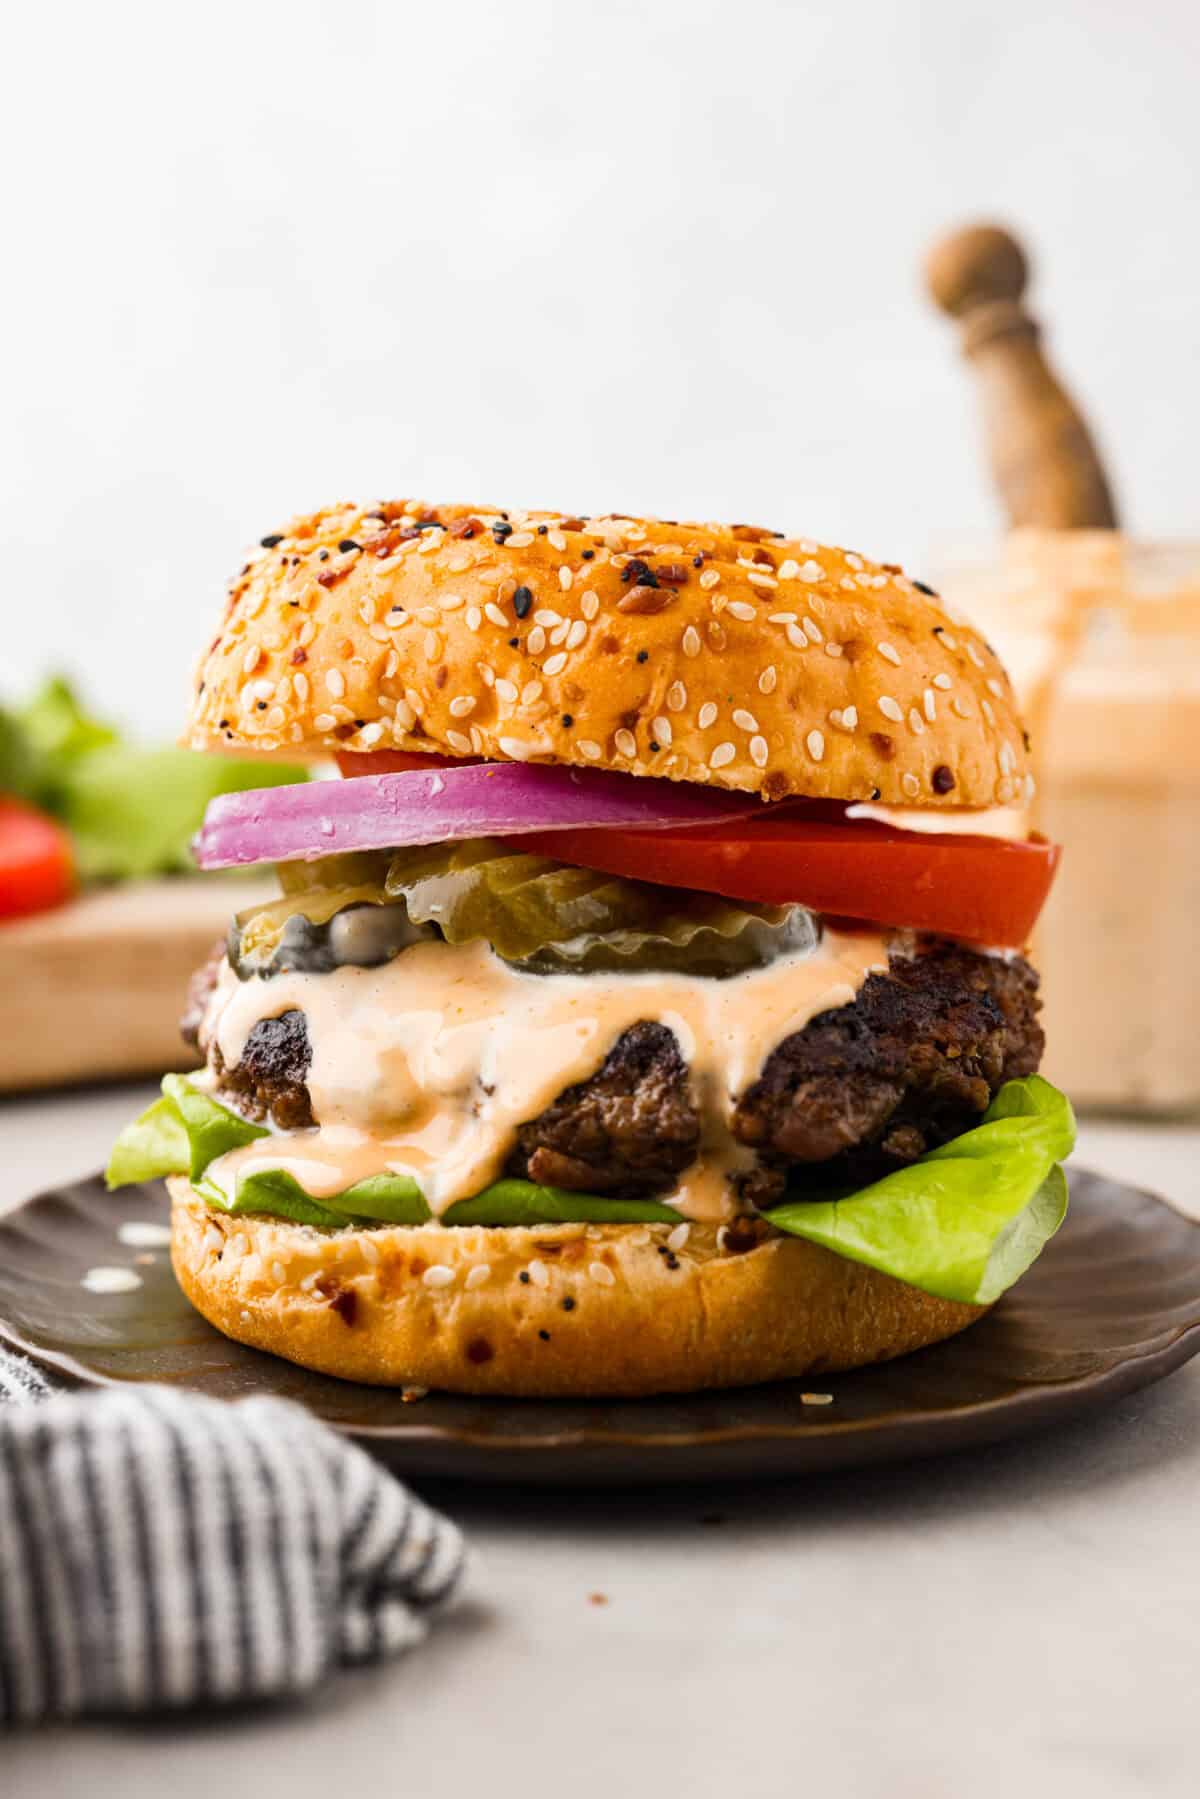 A burger ready to eat loaded with sauce and toppings. 